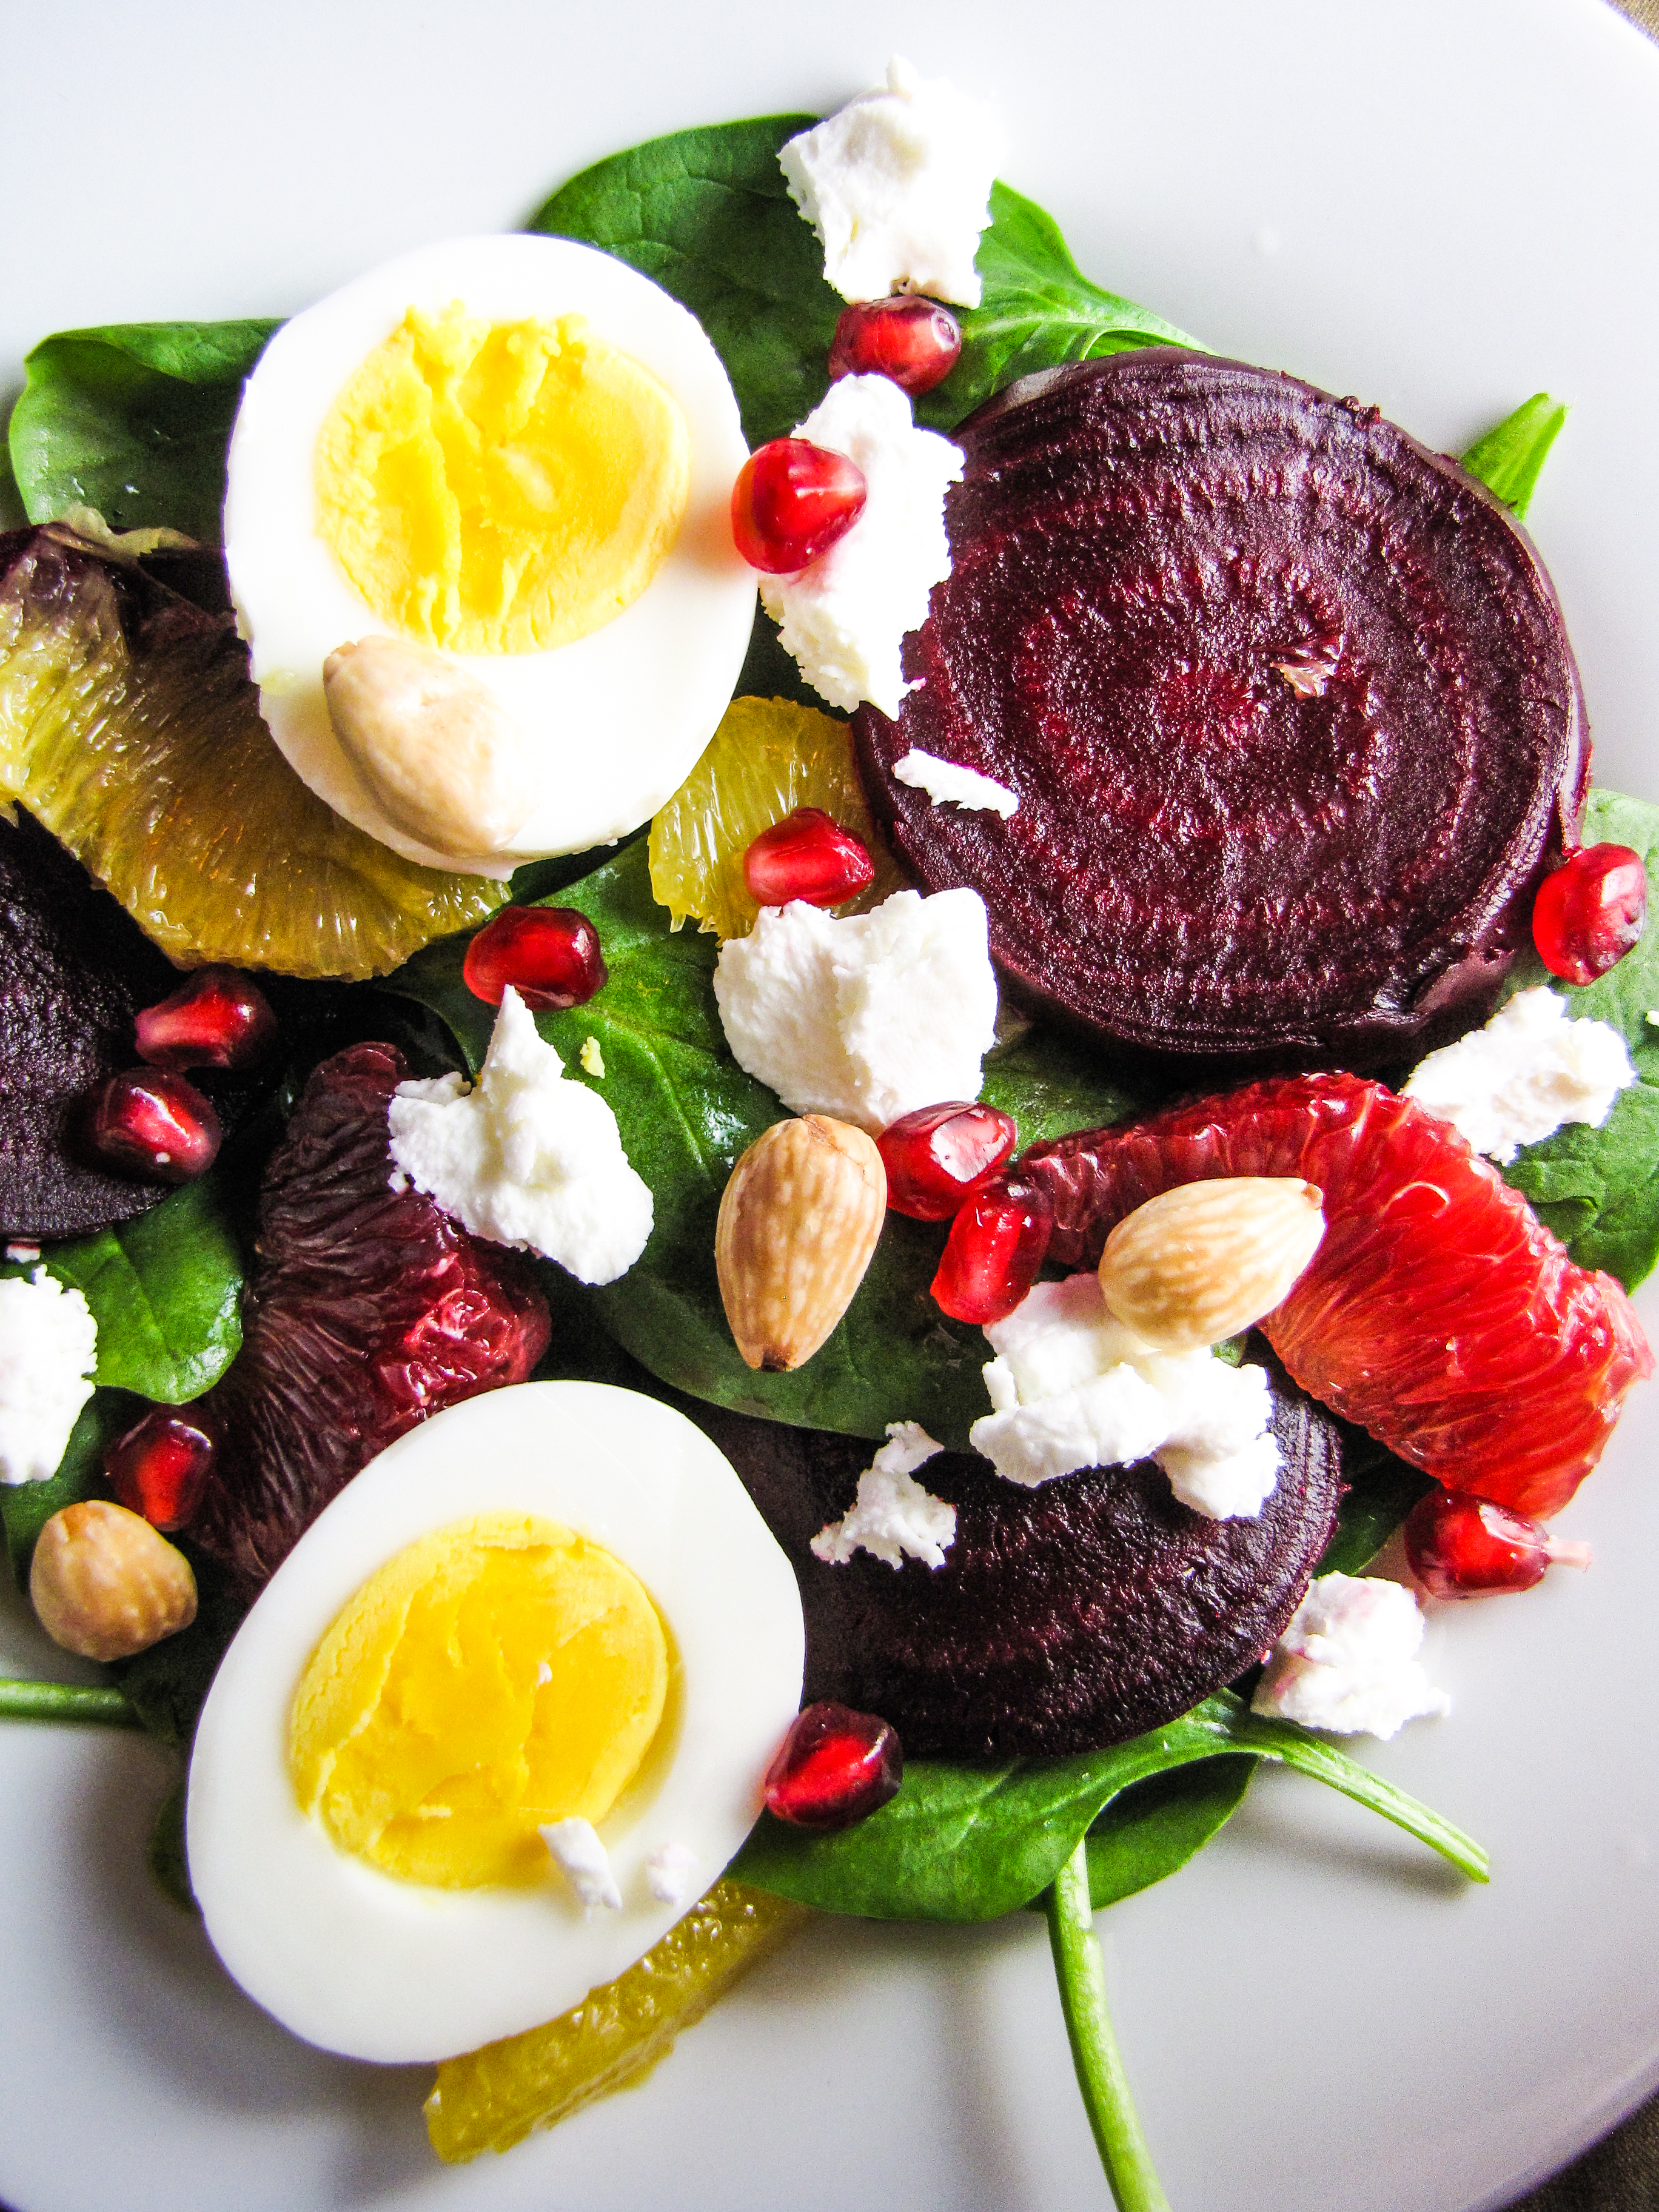 Roasted Beet and Spinach Salad with Eggs, Goat Cheese, Pomegranate, and Orange {Katie at the Kitchen Door}